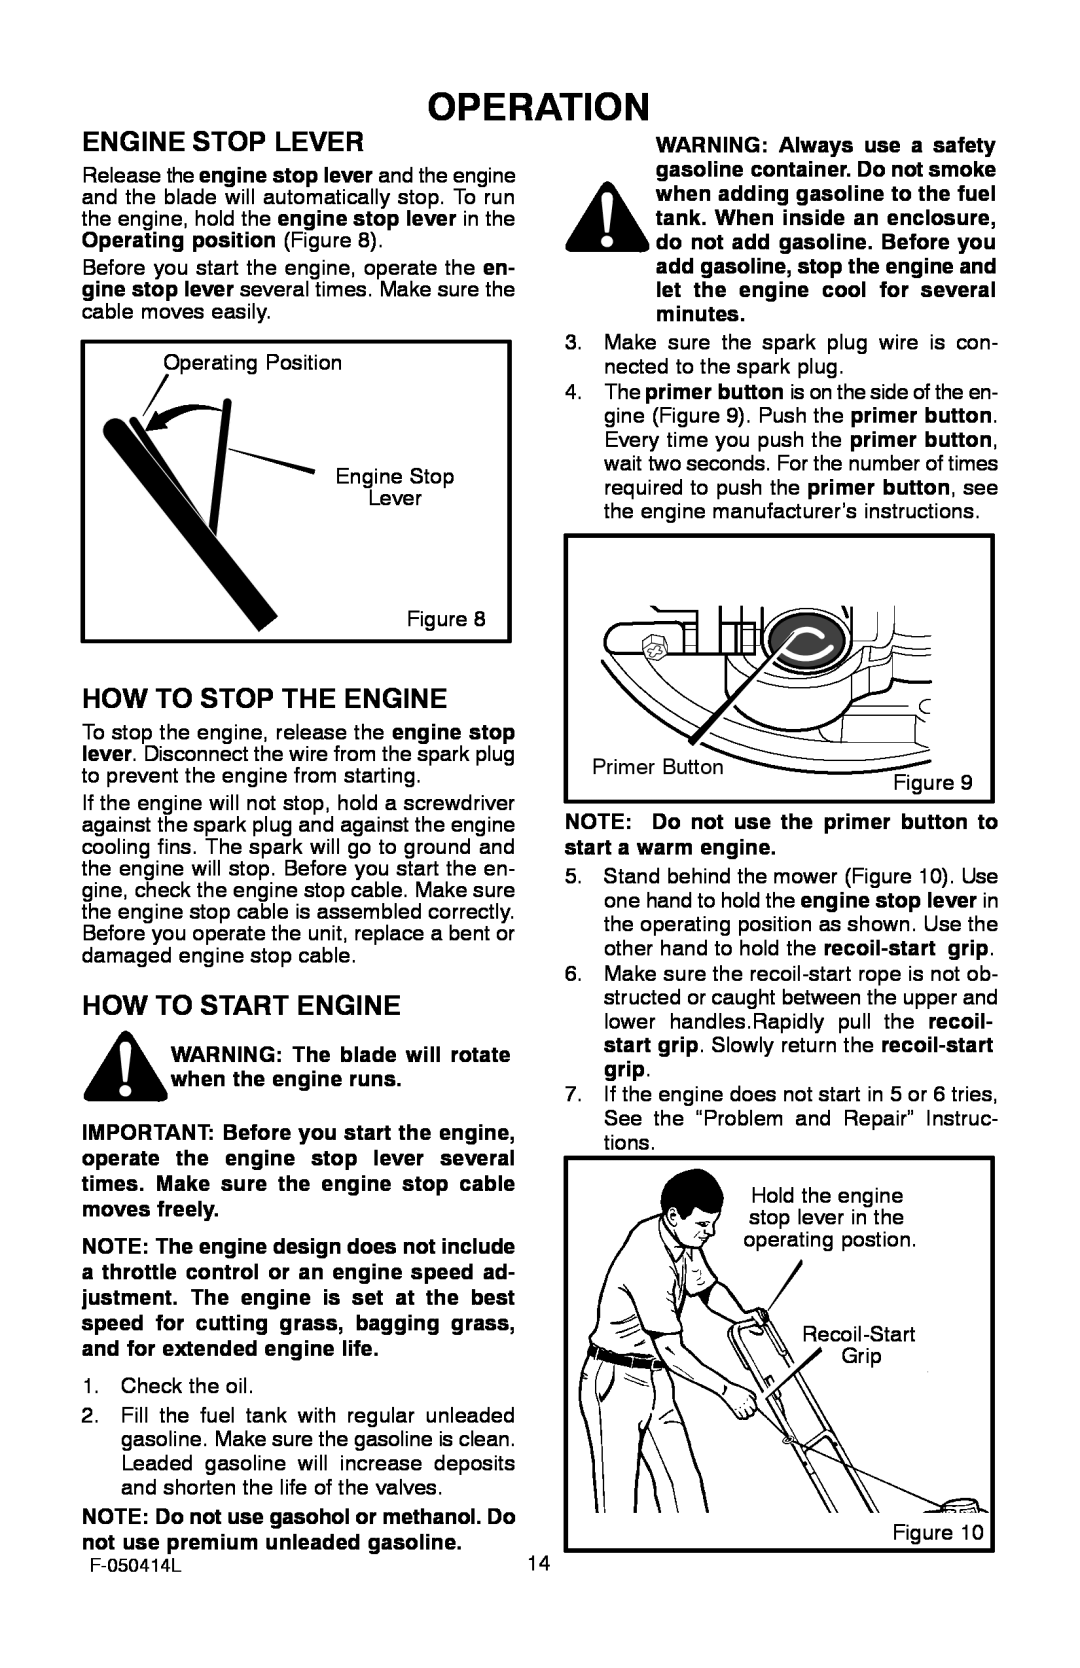 Adams 22 manual Operation, Engine Stop Lever, How To Stop The Engine, How To Start Engine 